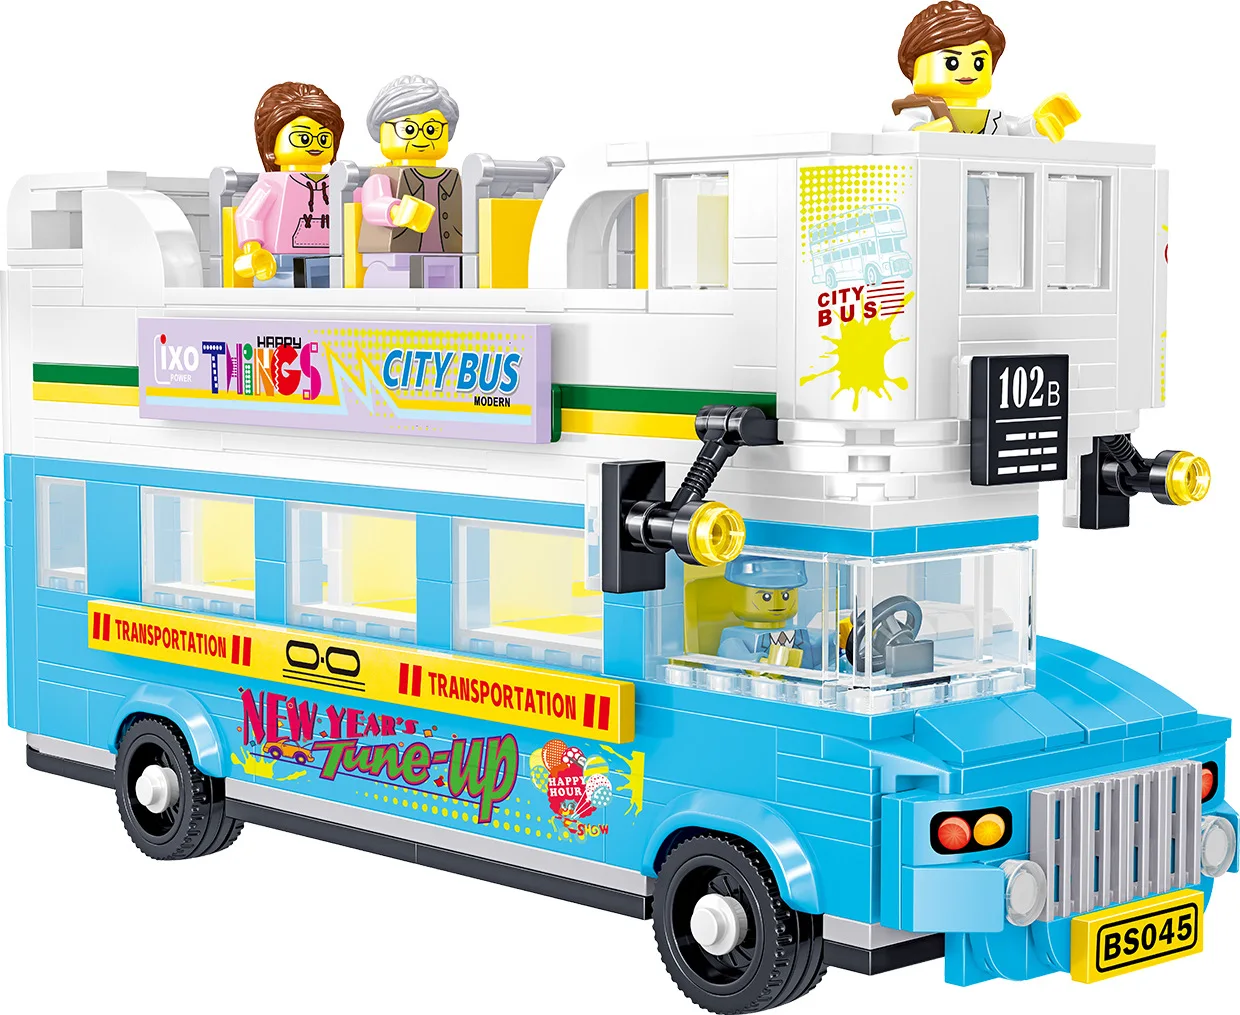 

602pcs City Series Street View Building Block Double Deck Sightseeing Bus Blocks Children's Puzzle Toy Small Particle Bricks